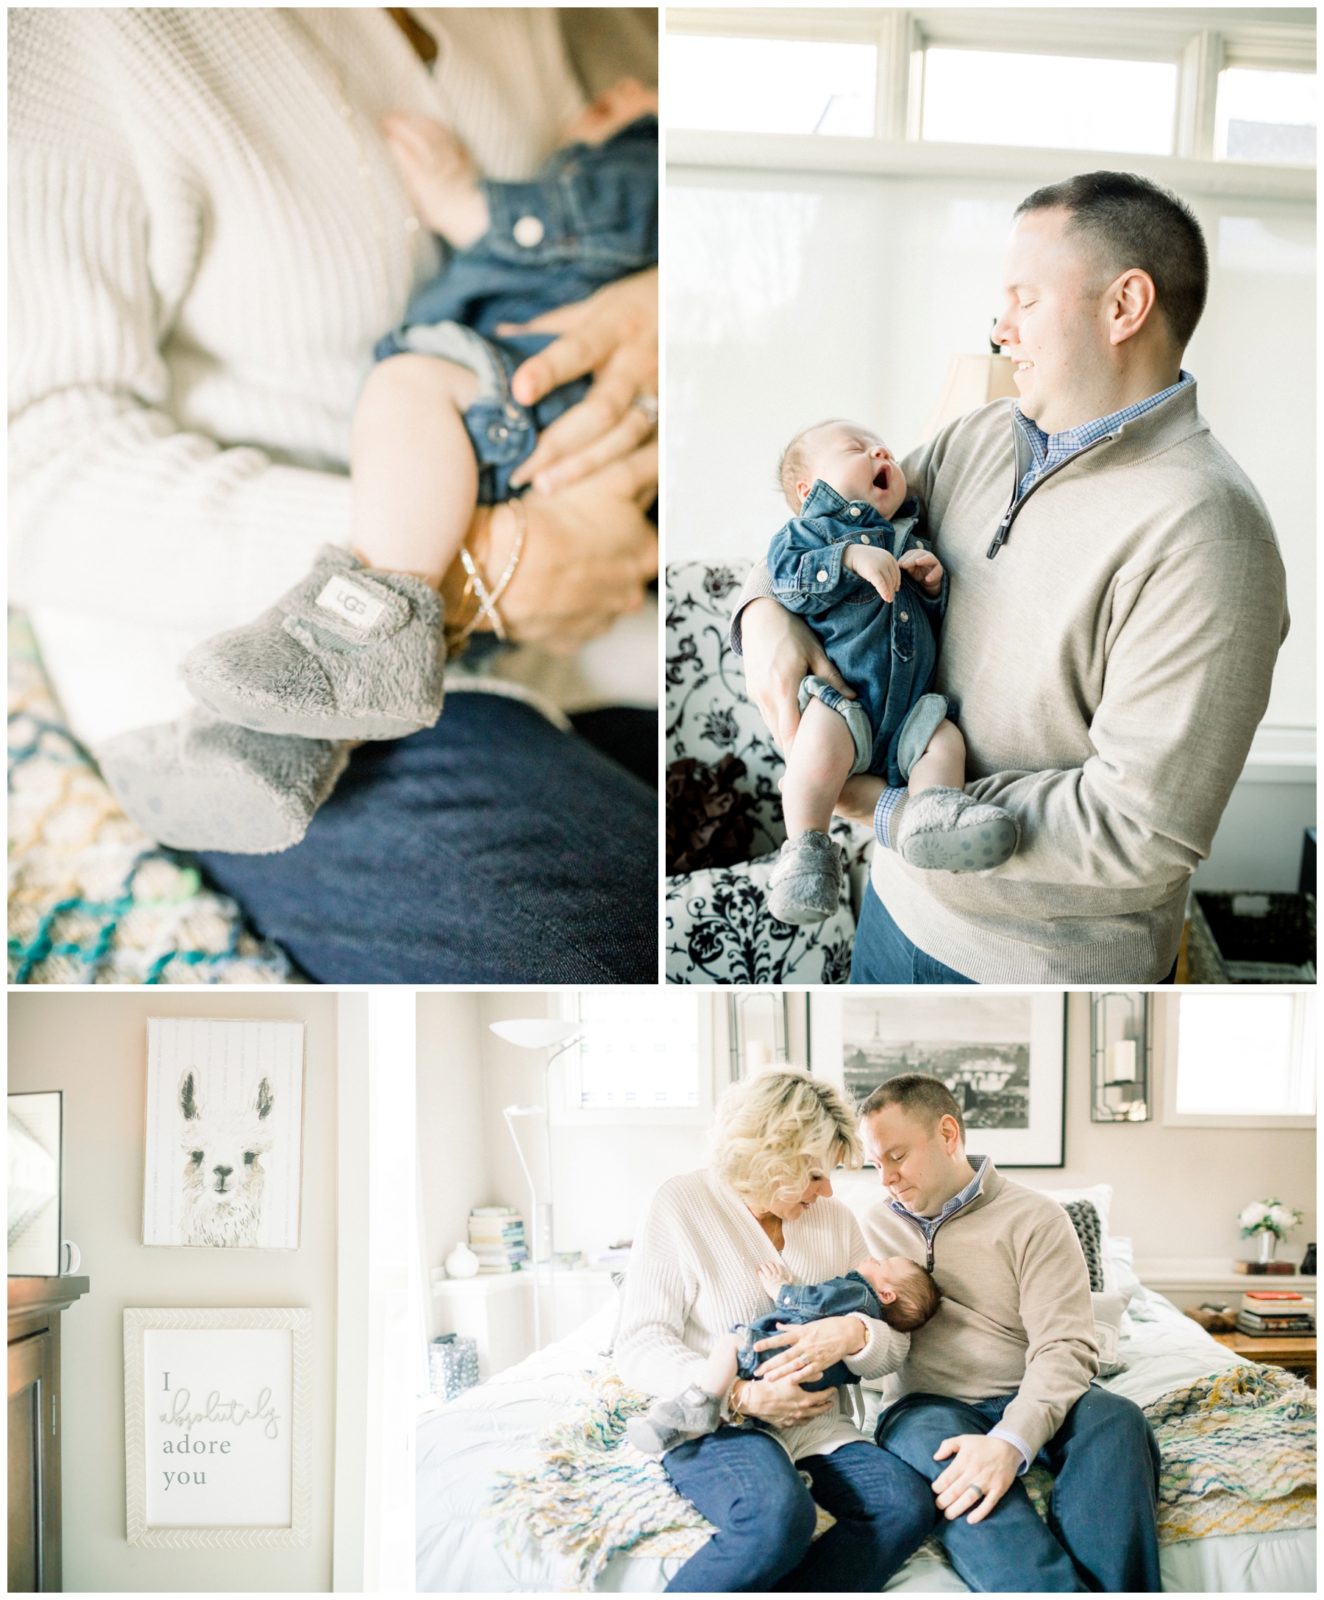 Pictures of a newborn baby with his parents.